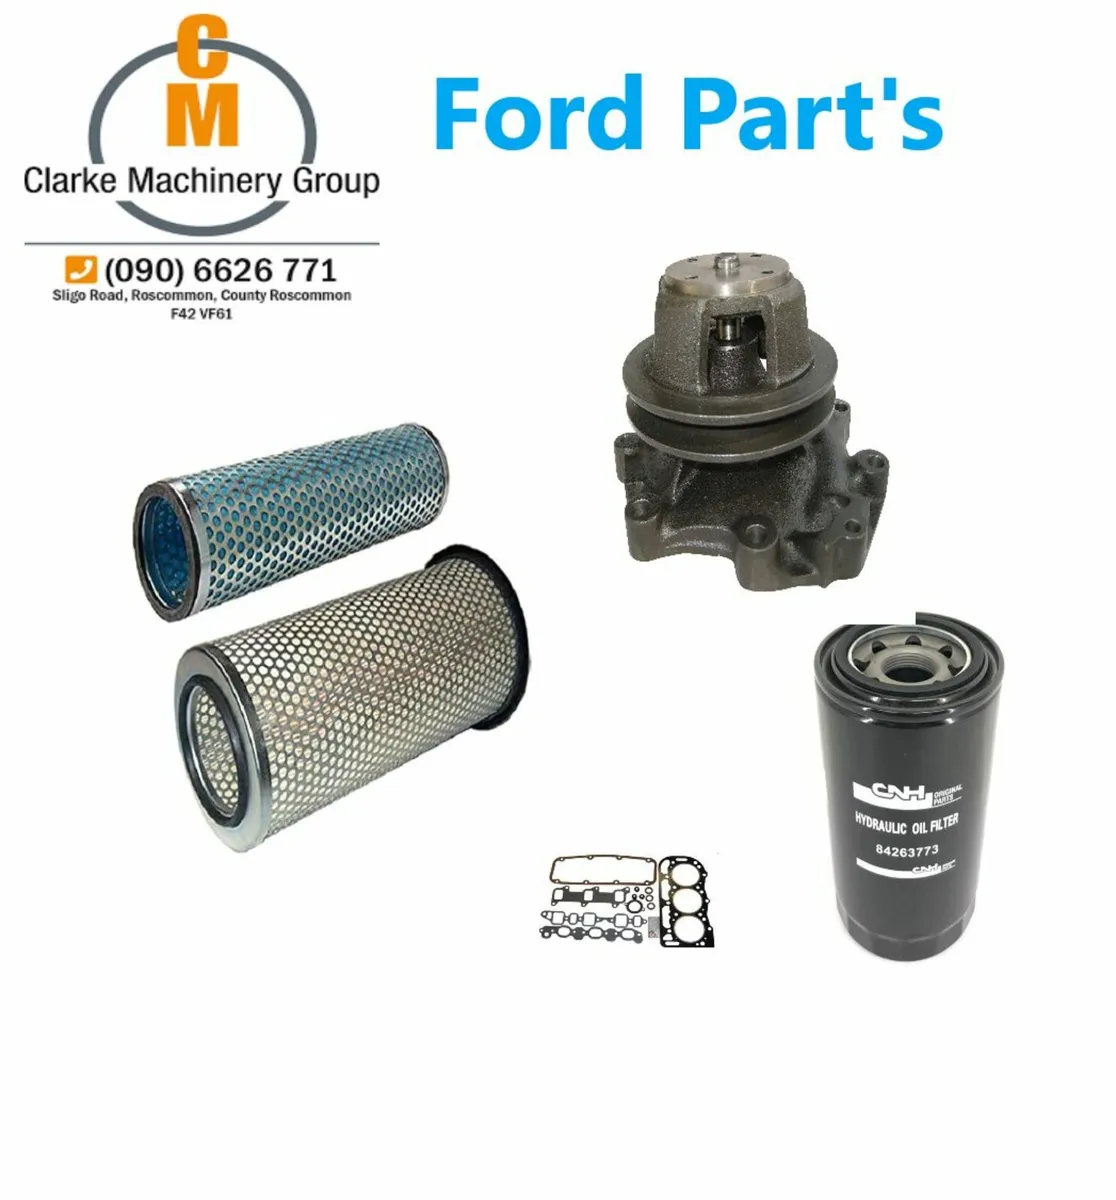 Ford Parts - Image 1